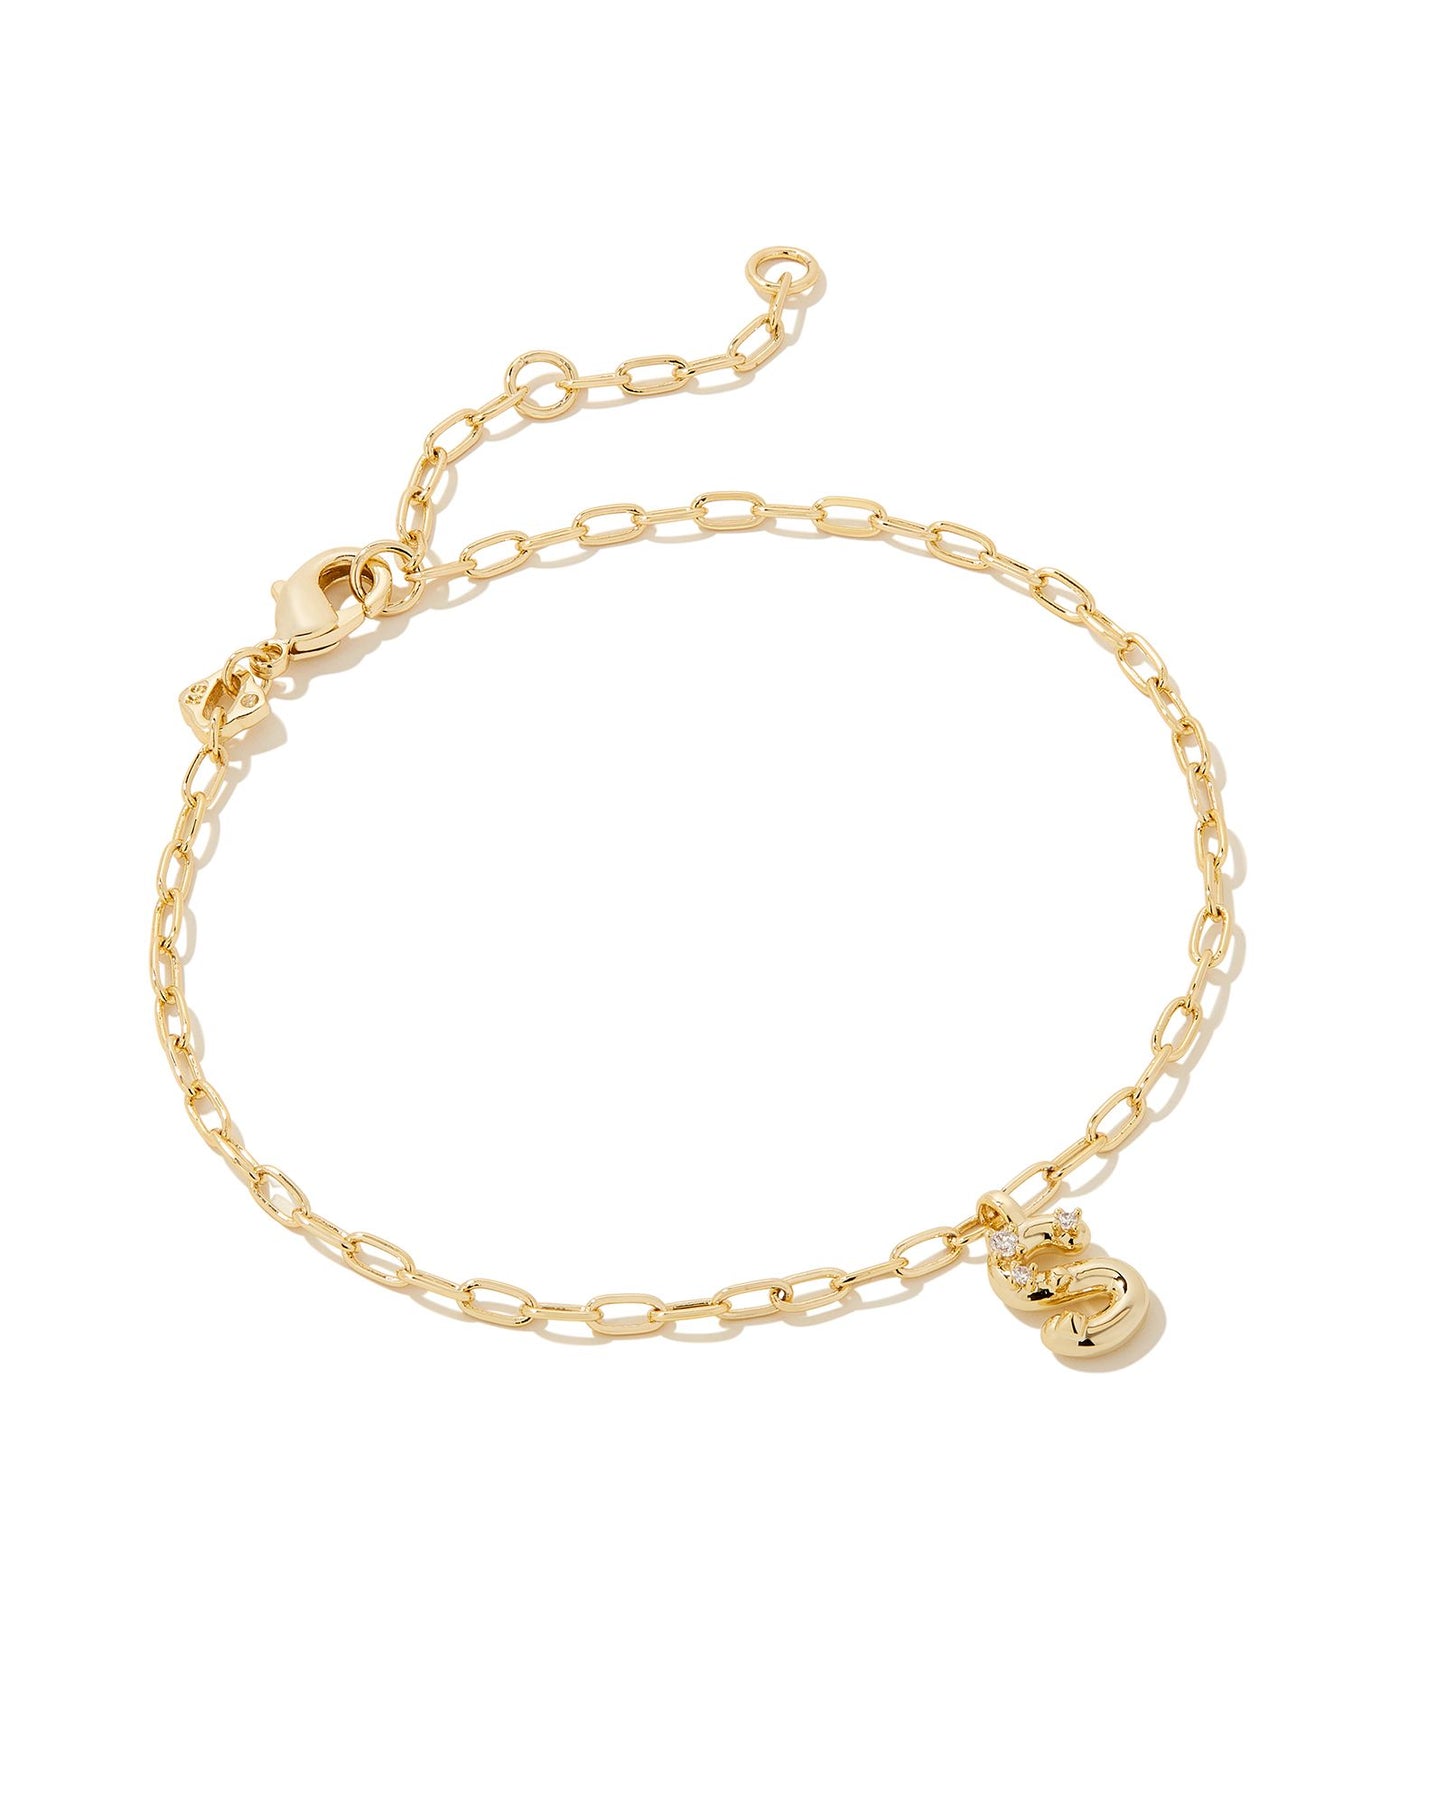 Add a personal touch to your wrist stack with the Crystal Delicate Chain Bracelet in White Crystal, our first Fashion Jewelry initial bracelet. Featuring a dainty chain and letter charm with a hint of sparkle, this bracelet is the perfect way to celebrate the ones you love—including yourself!  Dimensions- 6.5' CHAIN WITH 1.5' EXTENDER, 0.45'L X 0.26"W PENDANT Metal- 14K Gold plated over brass Closure- Lobster Clasp Material-  White CZ Letter S